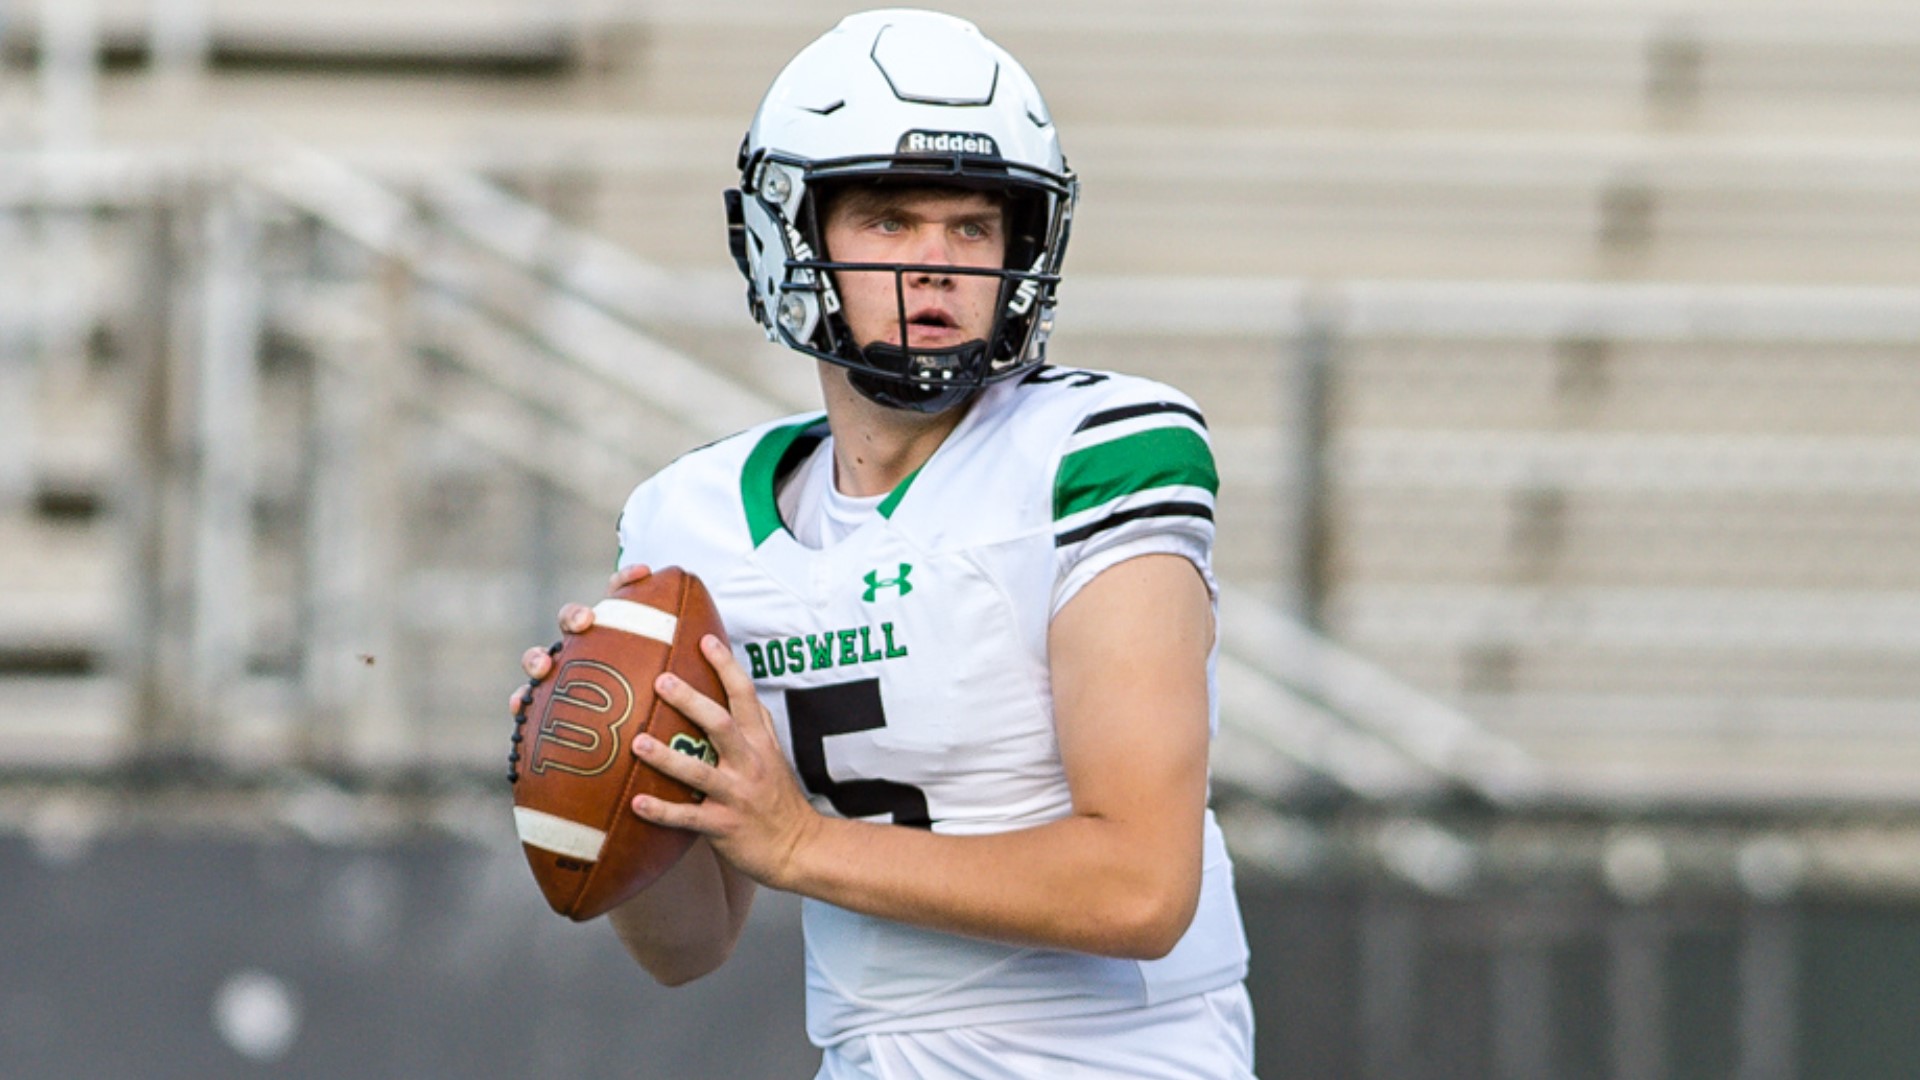 Roswell High School quarterback Robbie Roper has died Wednesday, according to a tweet posted on his social media account from the family.